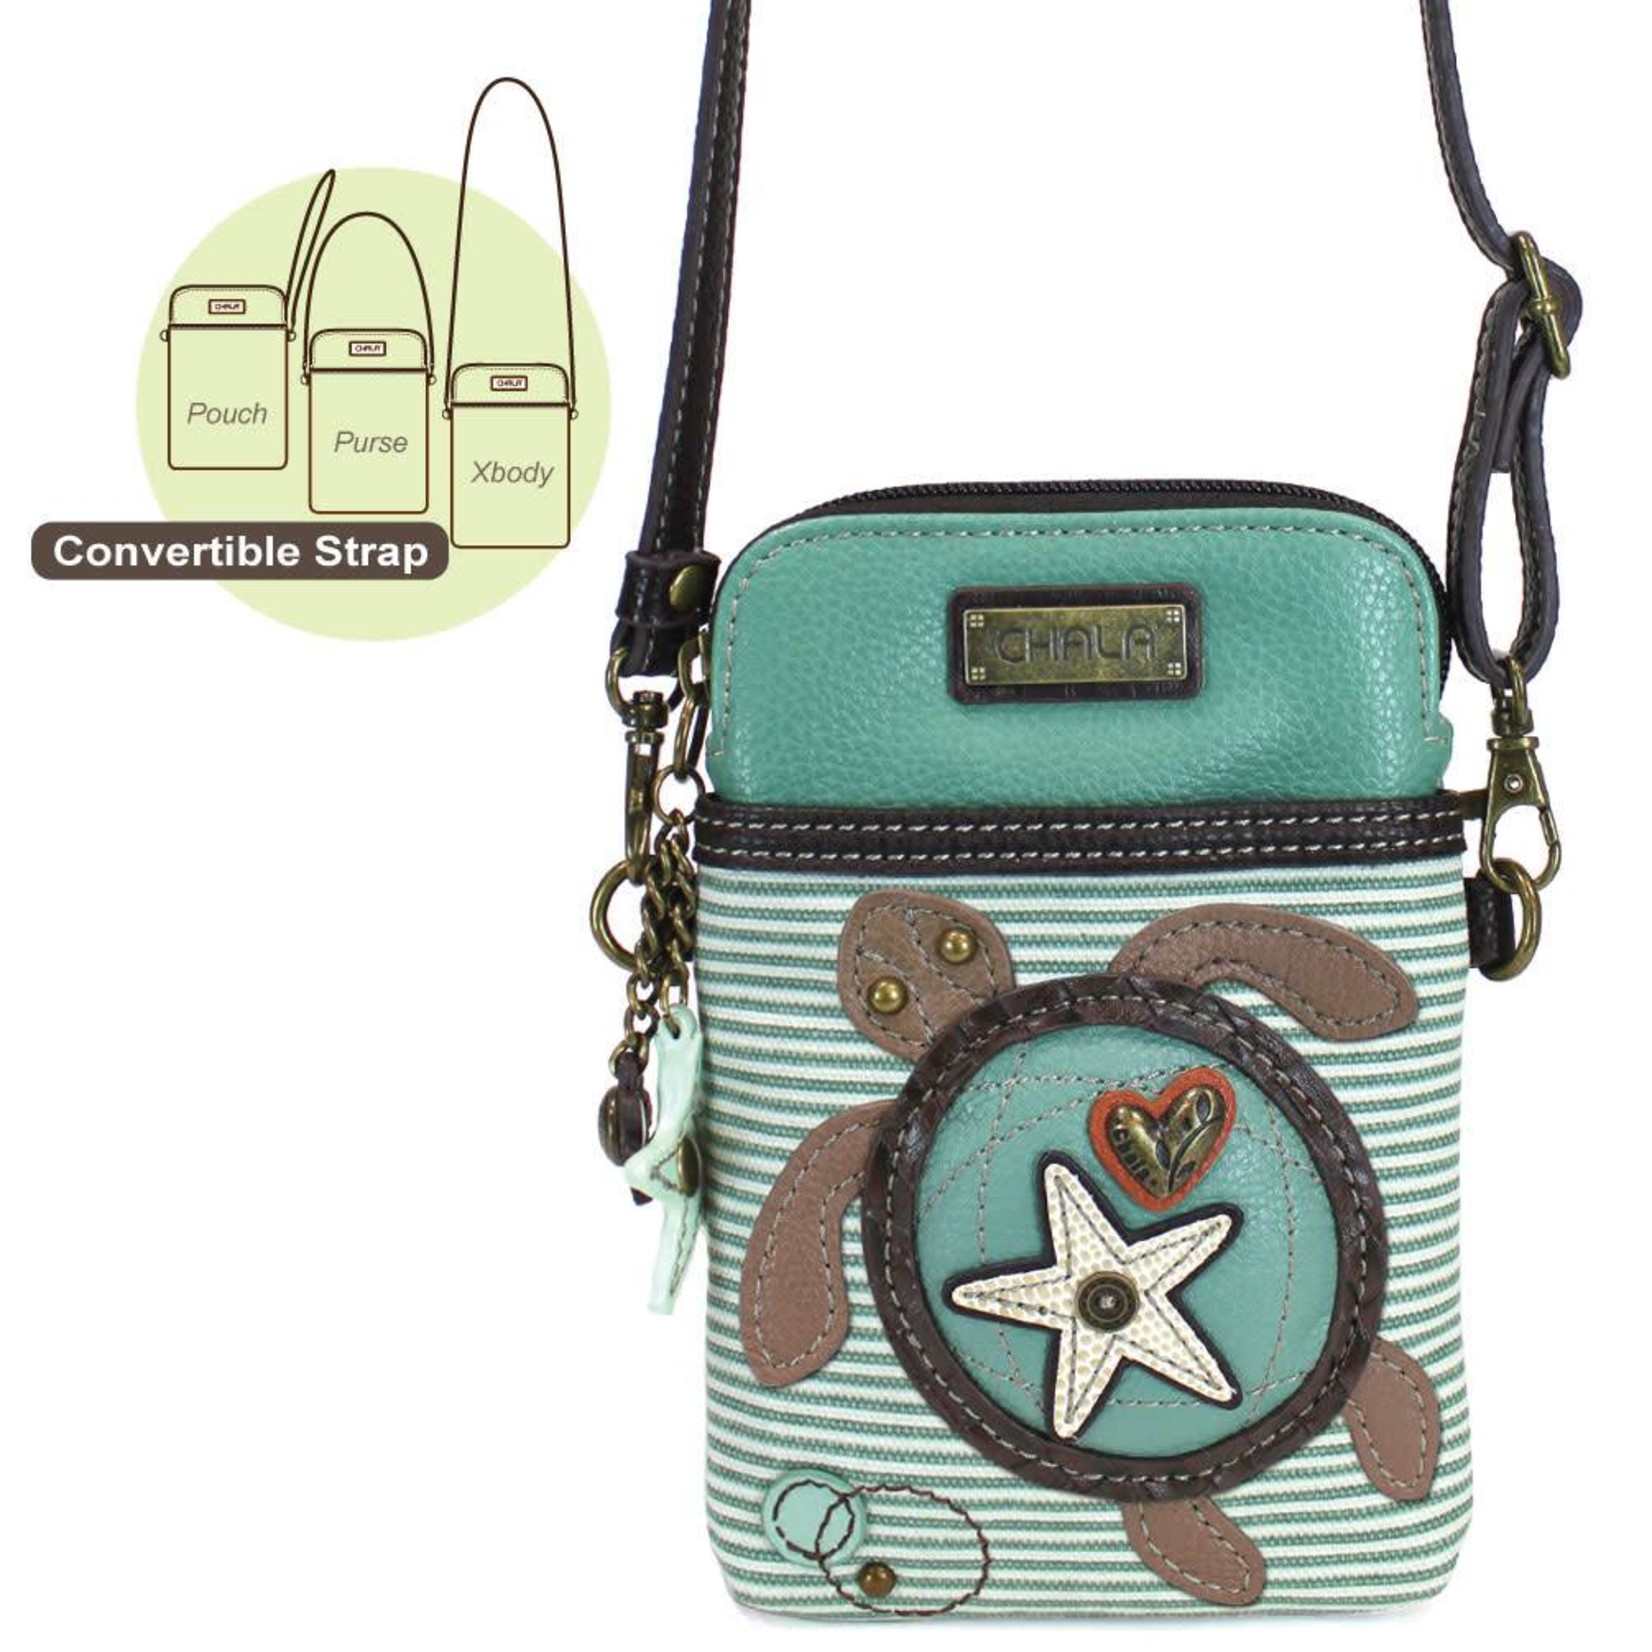 Chala Dragonfly Wallet Crossbody Purse Teal & Brown 7” x 4.5” Colorful